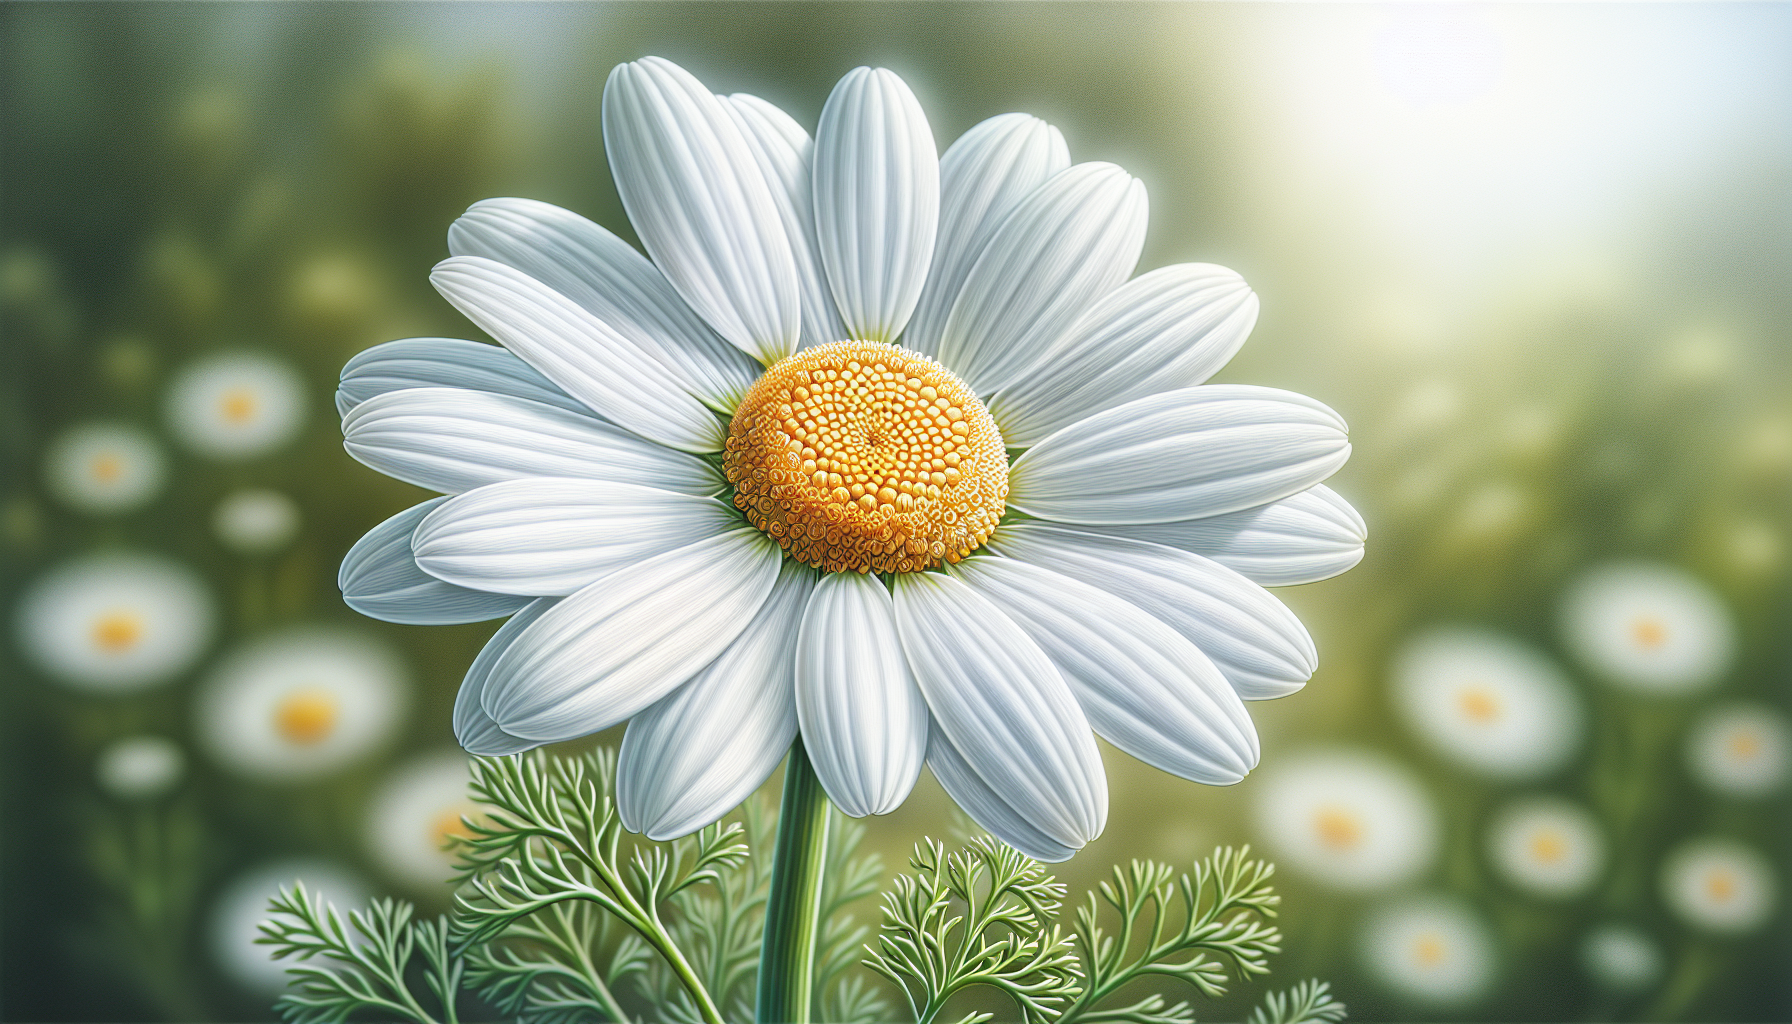 Illustration of a single white daisy with a yellow center